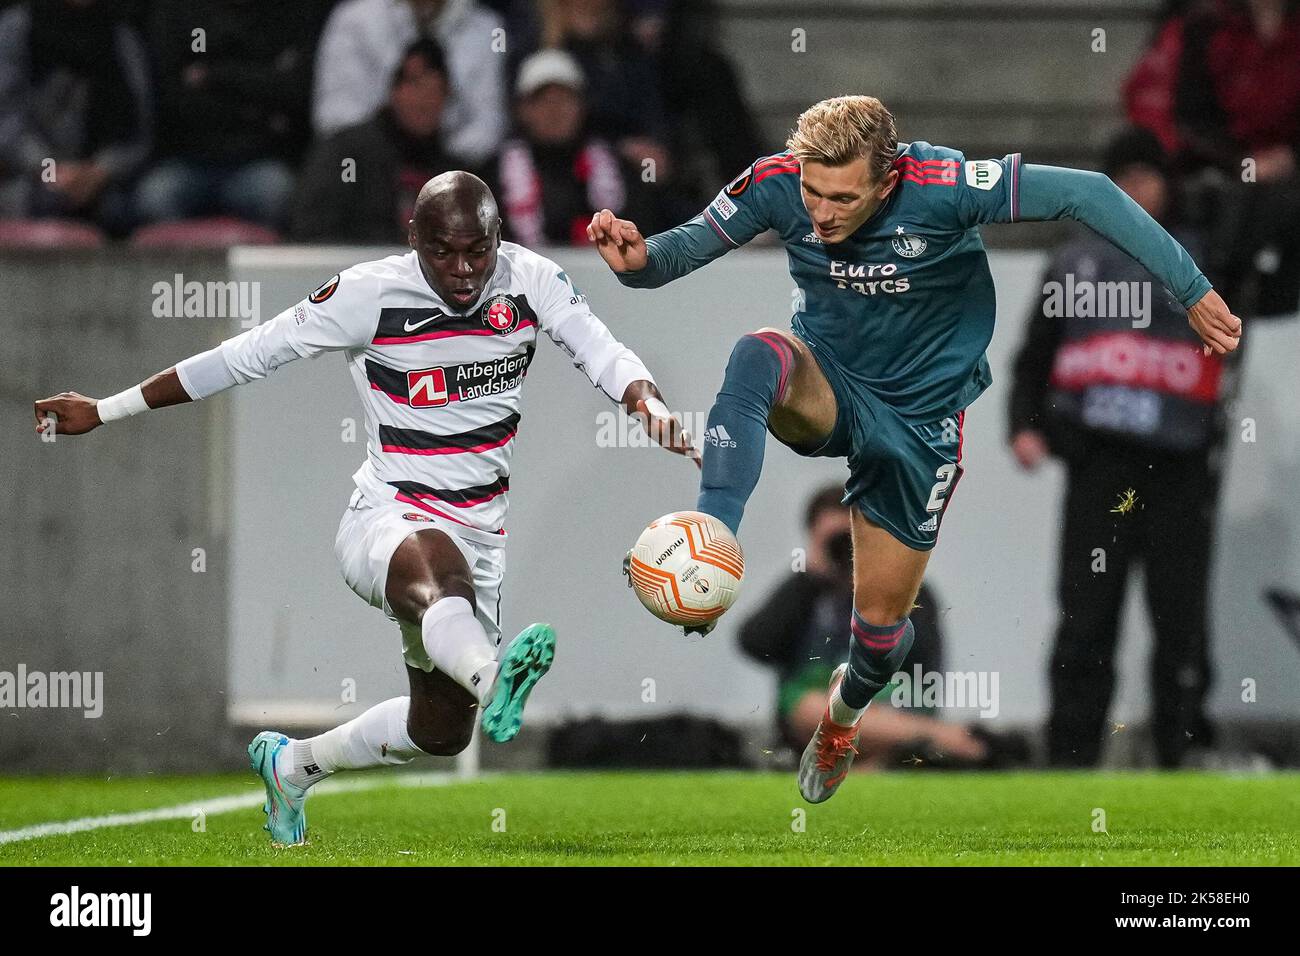 Herning - Pione Sisto of FC Midtjylland, Marcus Holmgren Pedersen of Feyenoord during the match between FC Midtjylland v Feyenoord at MCH Arena on 6 October 2022 in Herning, Denmark. (Box to Box Pictures/Yannick Verhoeven) Stock Photo